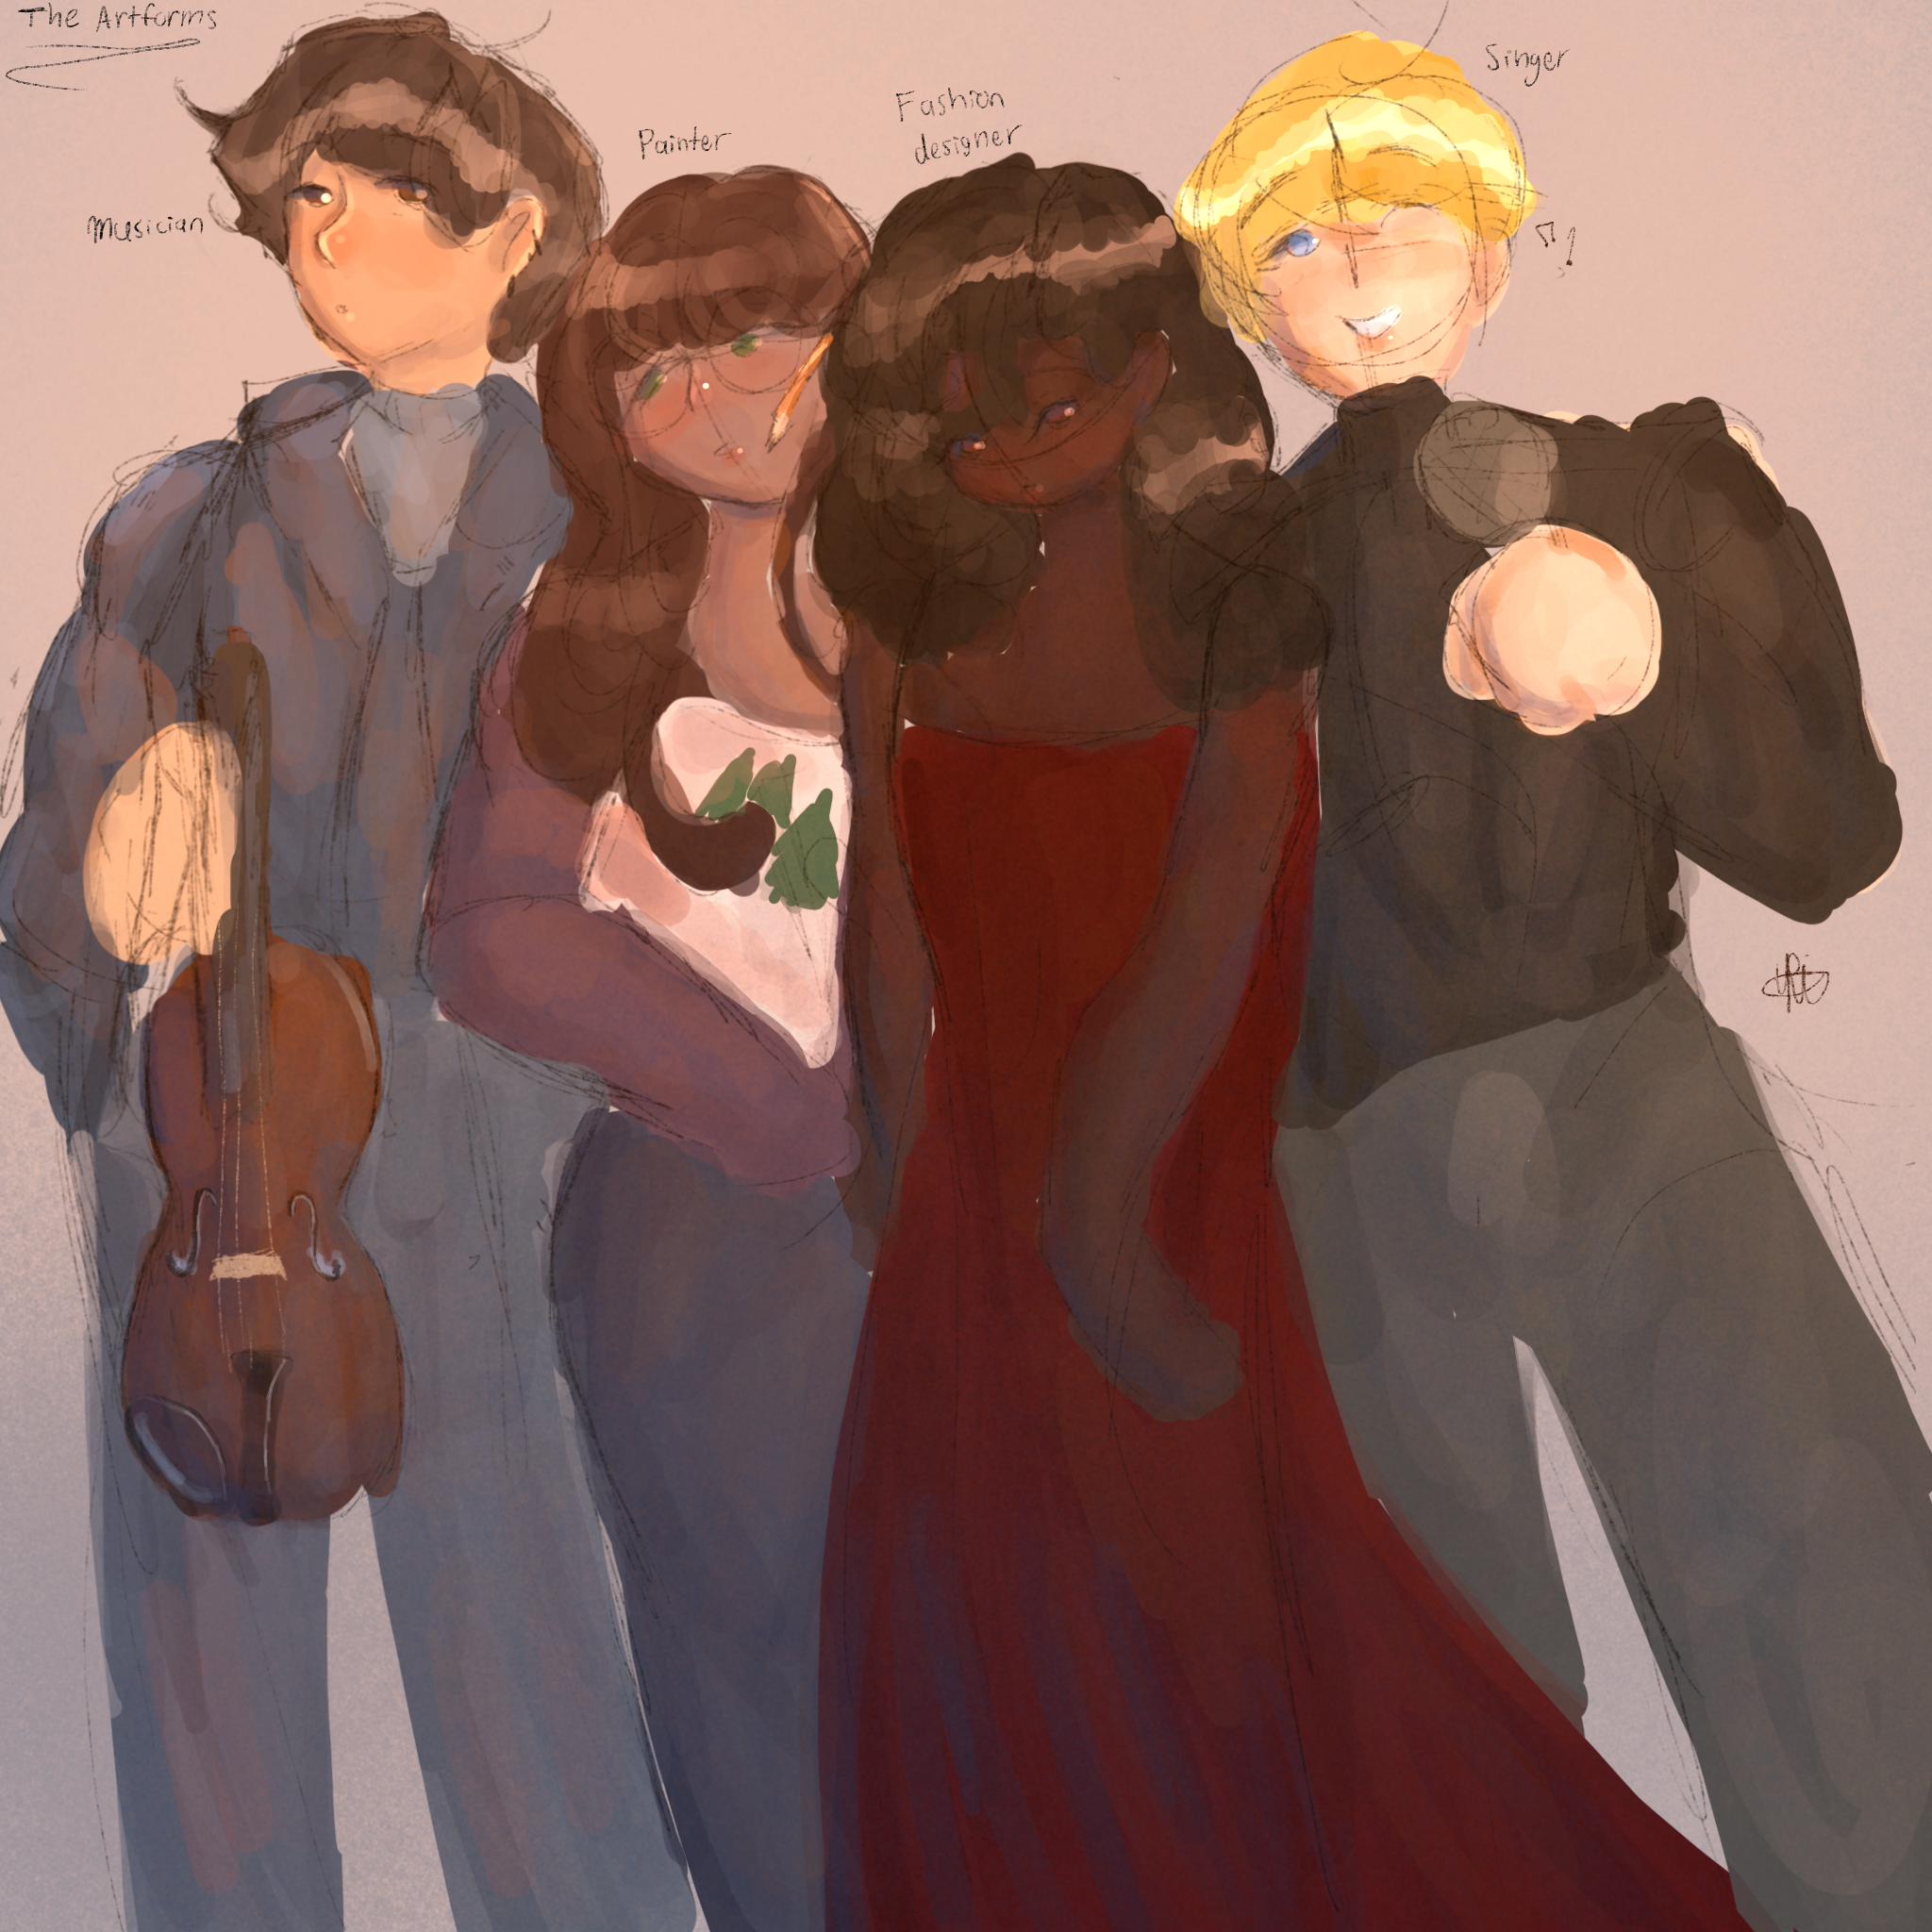 Four computer drawn anime-style people, each representing a different art form: music, painting, fashion designer, and singer